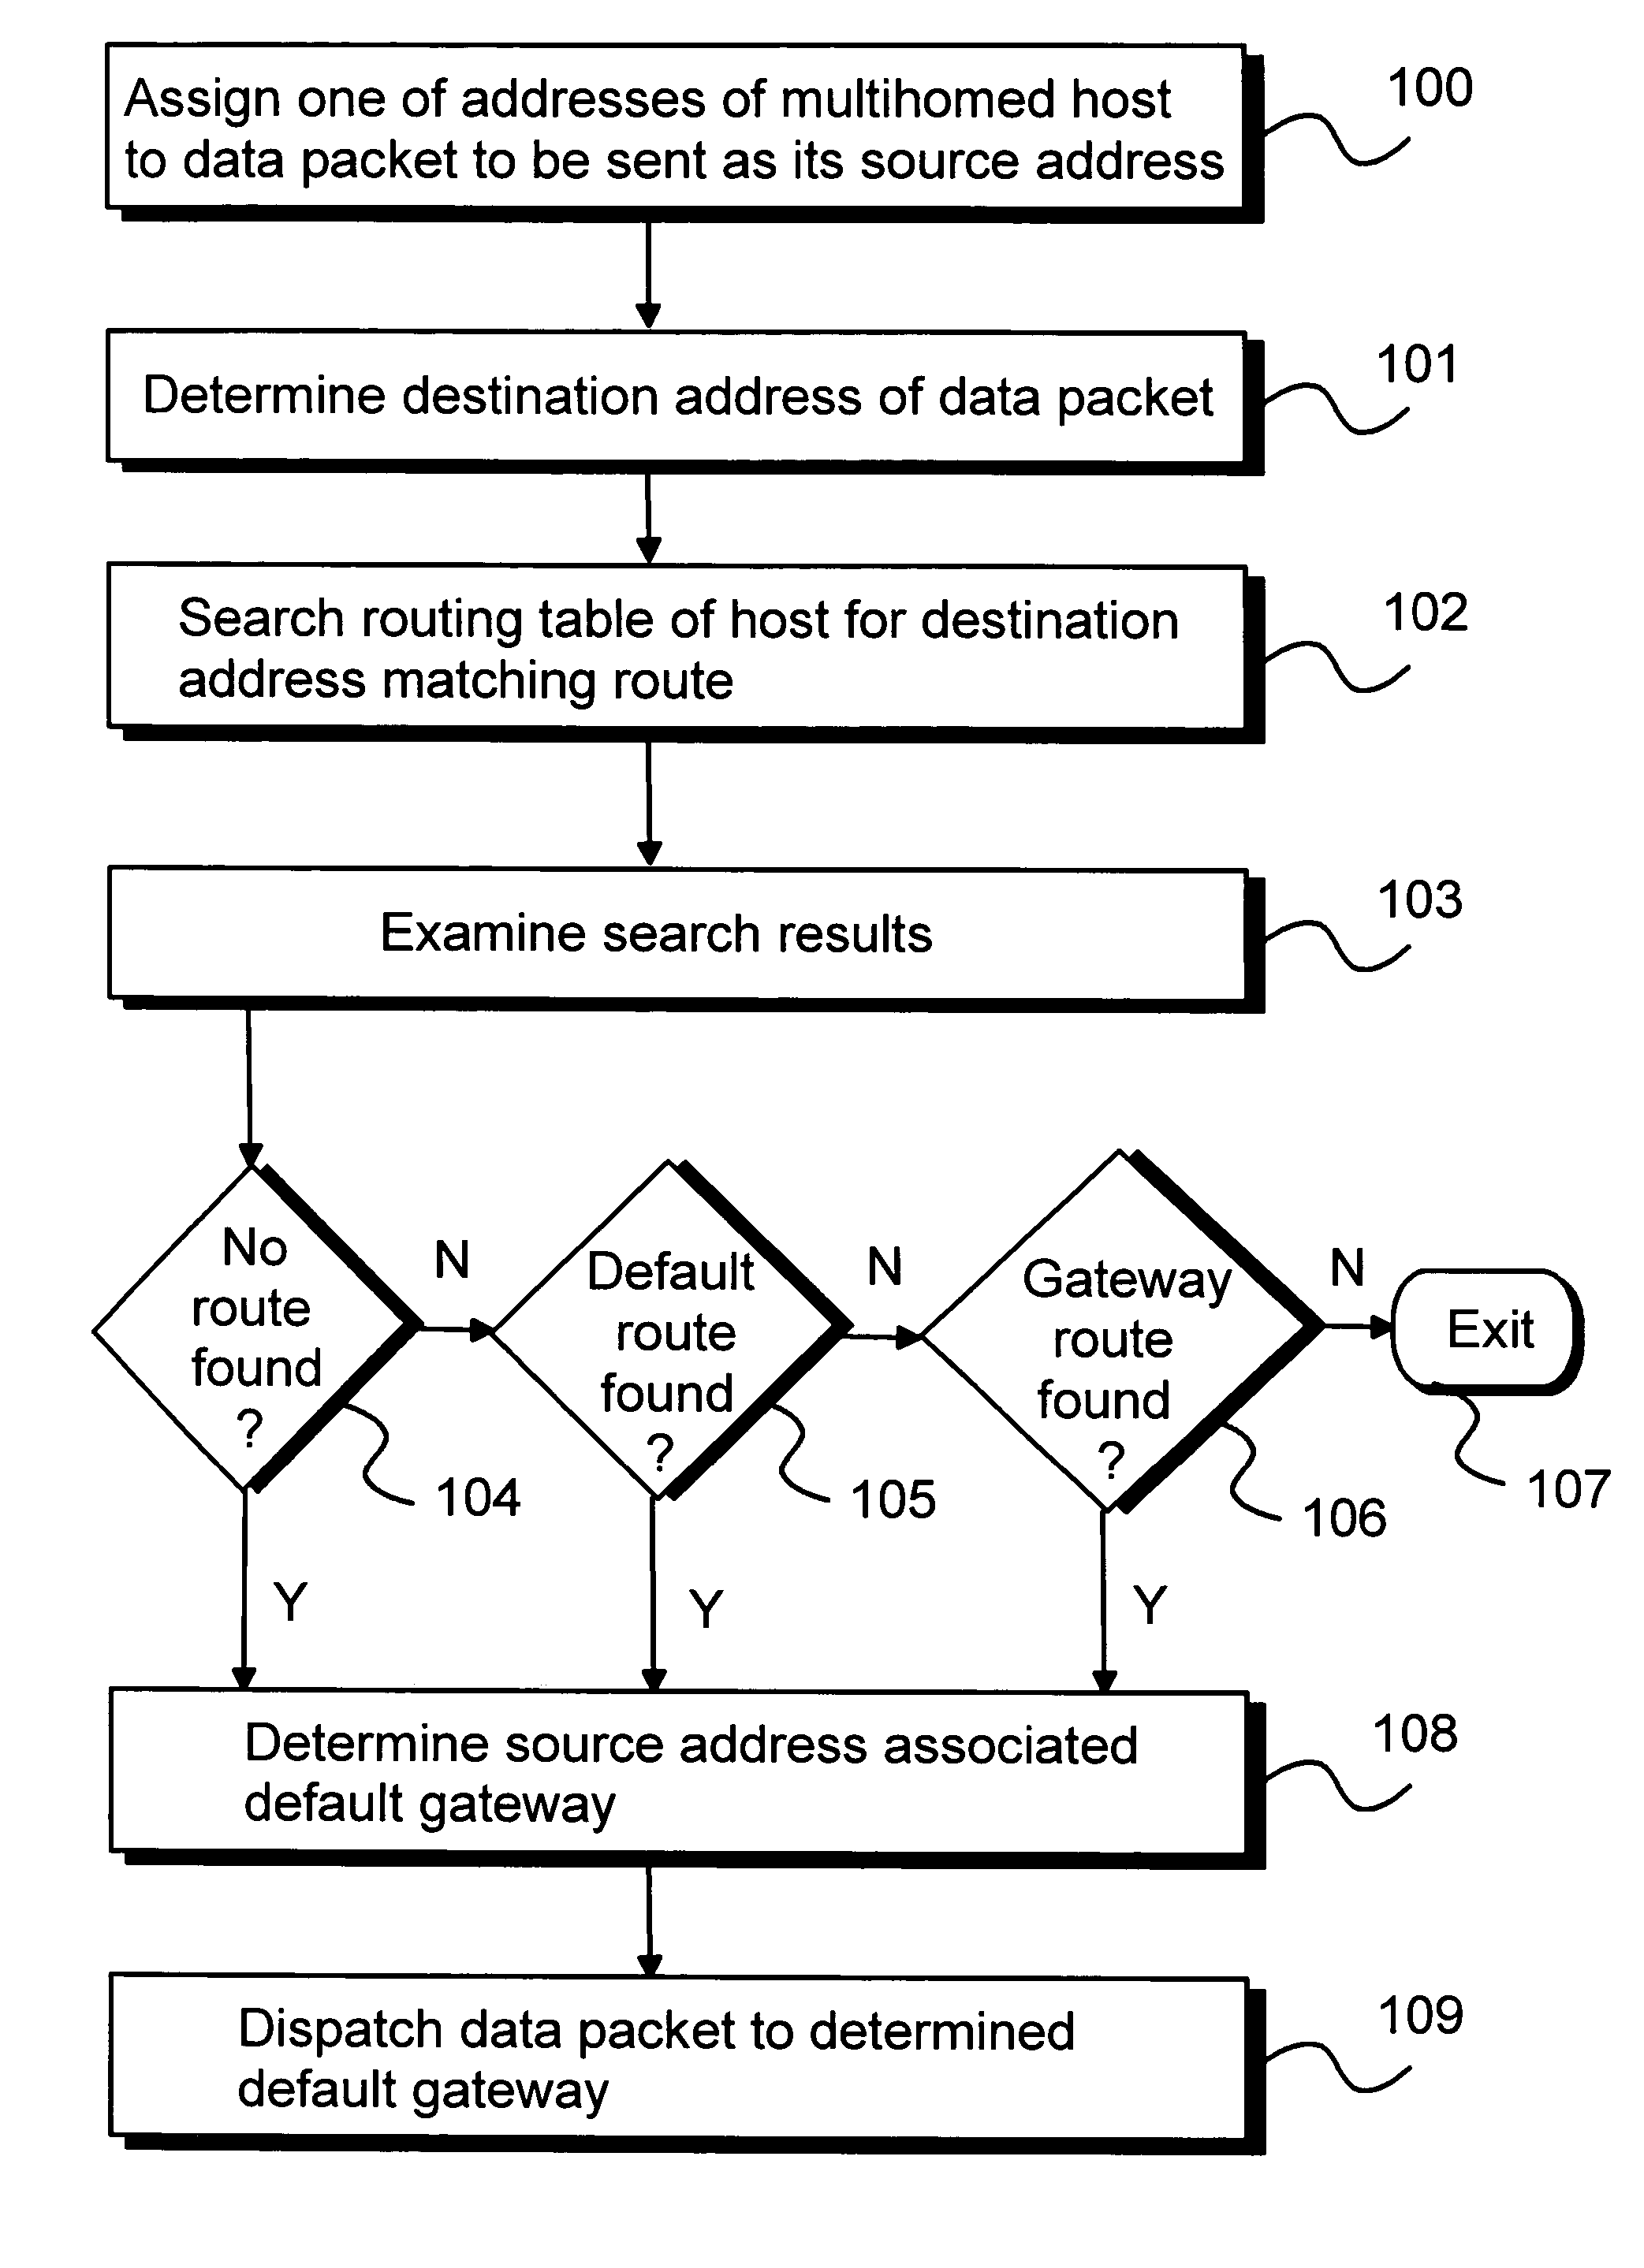 Routing data packets from a multihomed host